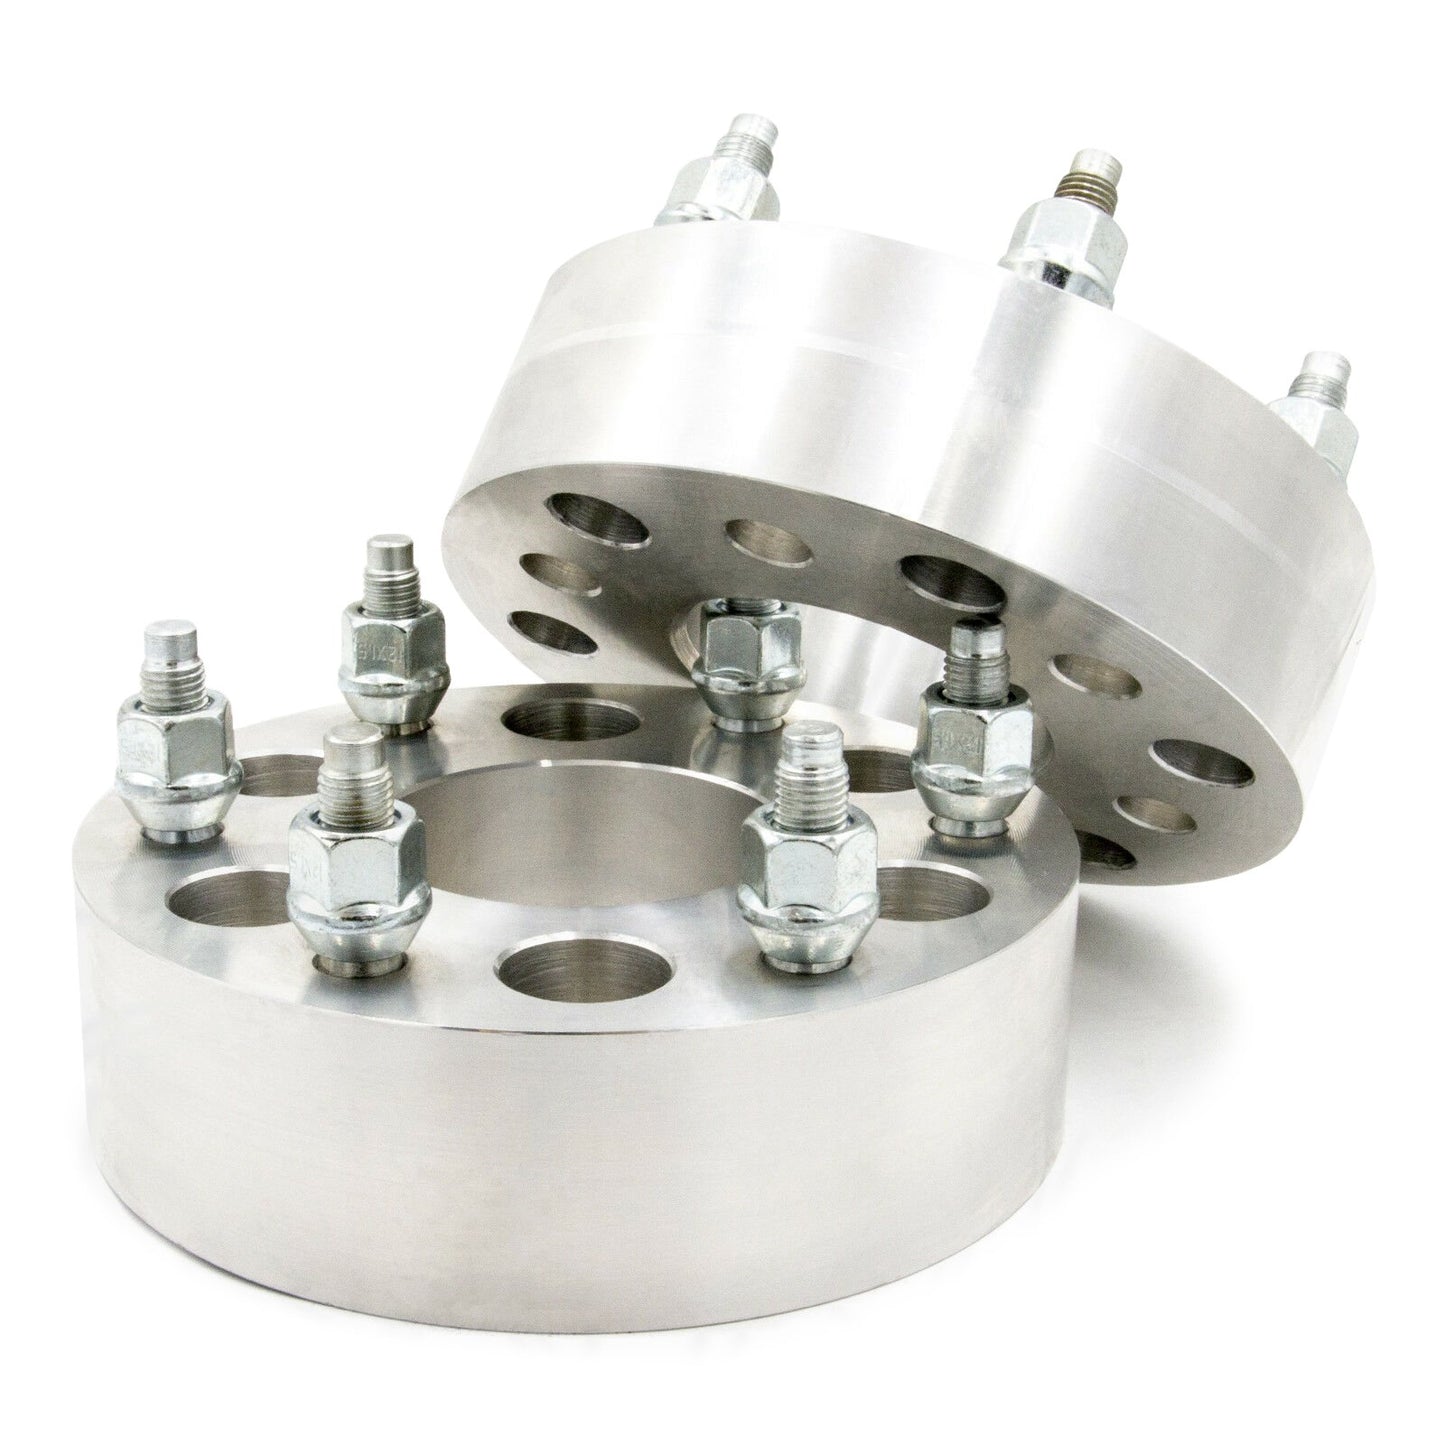 6x115 to 6x120 Wheel Spacer/Adapter - Thickness: 3/4"- 4"